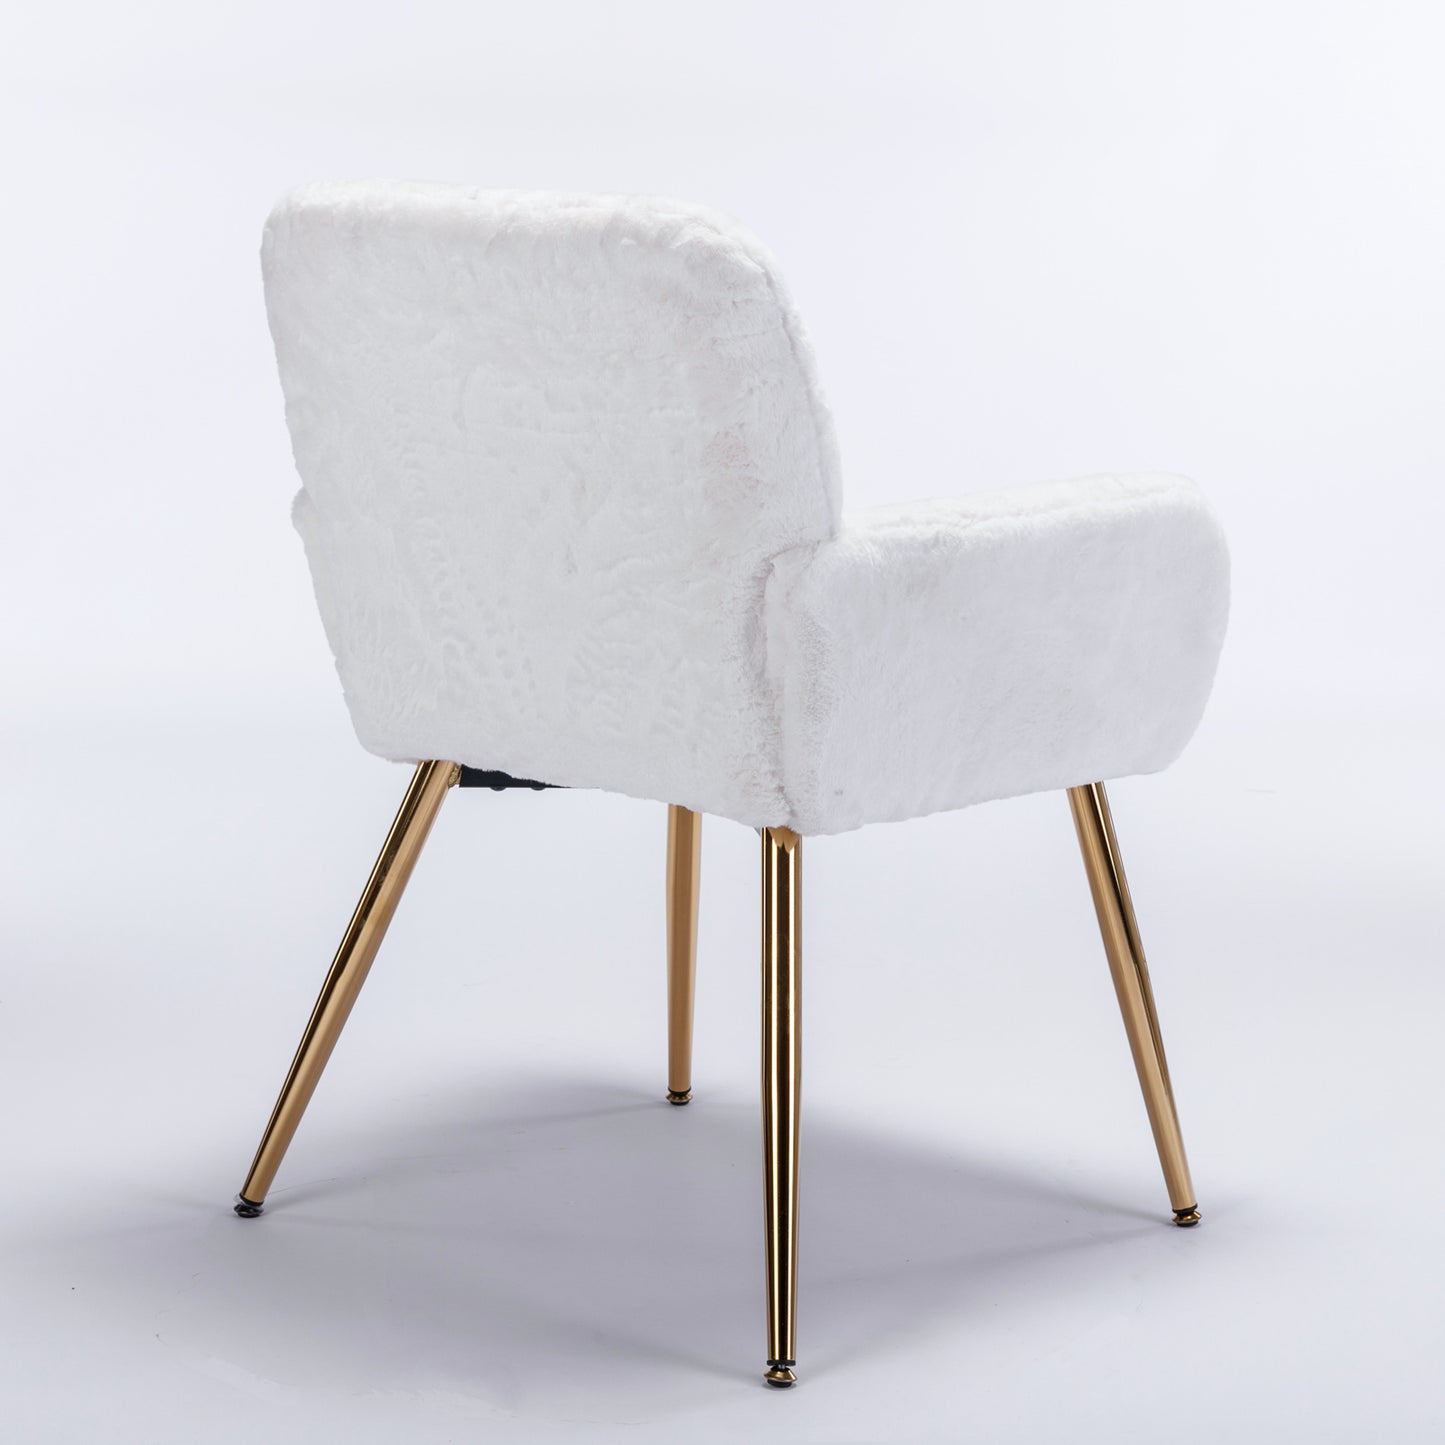 Artificial Rabbit Hair Dining Chair, Furry Desk Chair, Modern Faux Fur Chair for Teen Girls, Comfy Armchair with Golden Metal Legs for Living Room, Vanity Makeup Chair, Set of 2, White Rabbit Hair